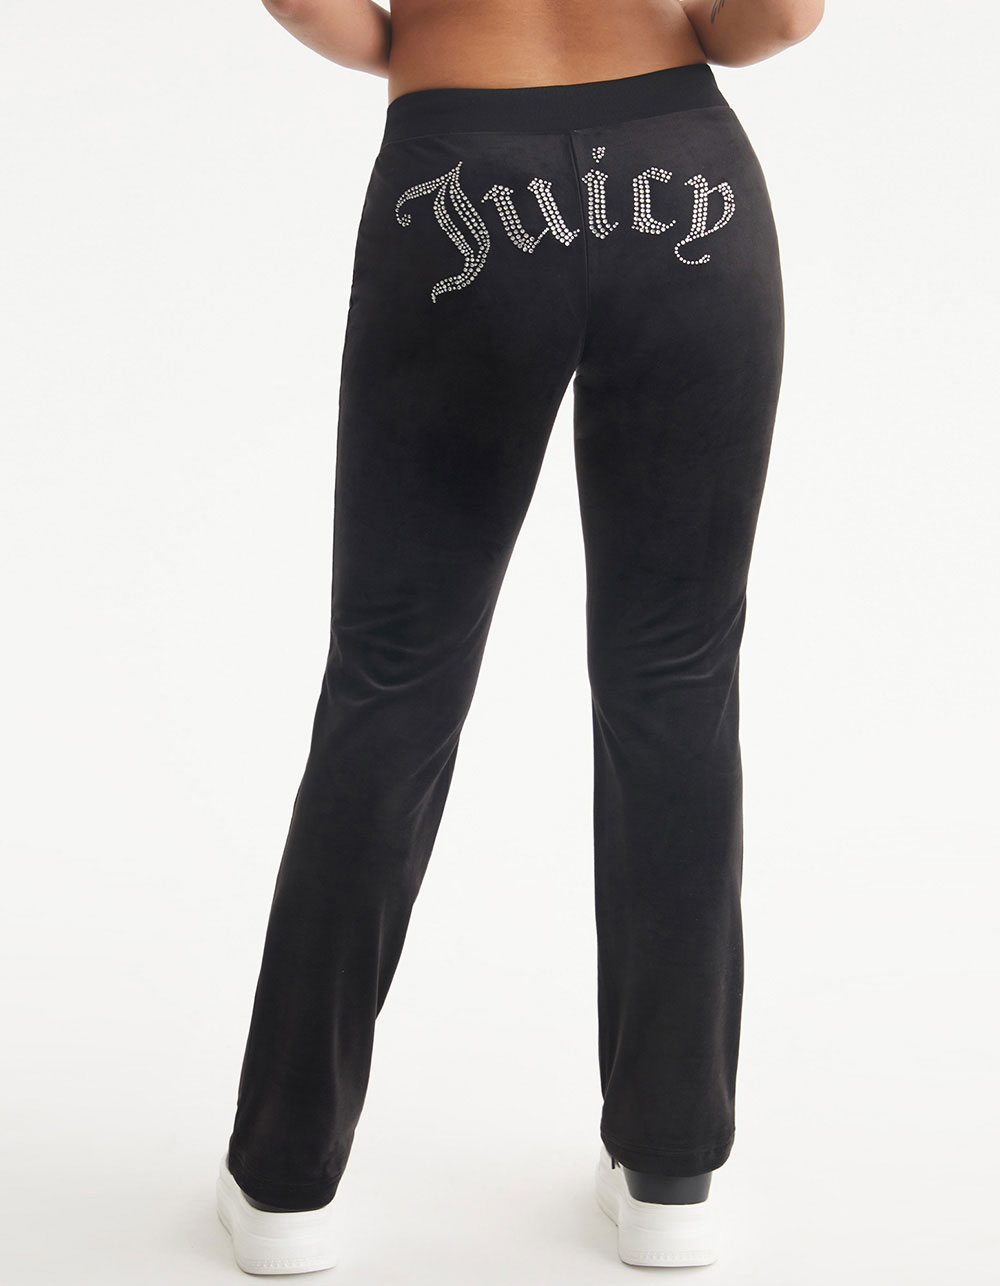 Juicy Couture Women's Essential Legging with Pockets Black Large